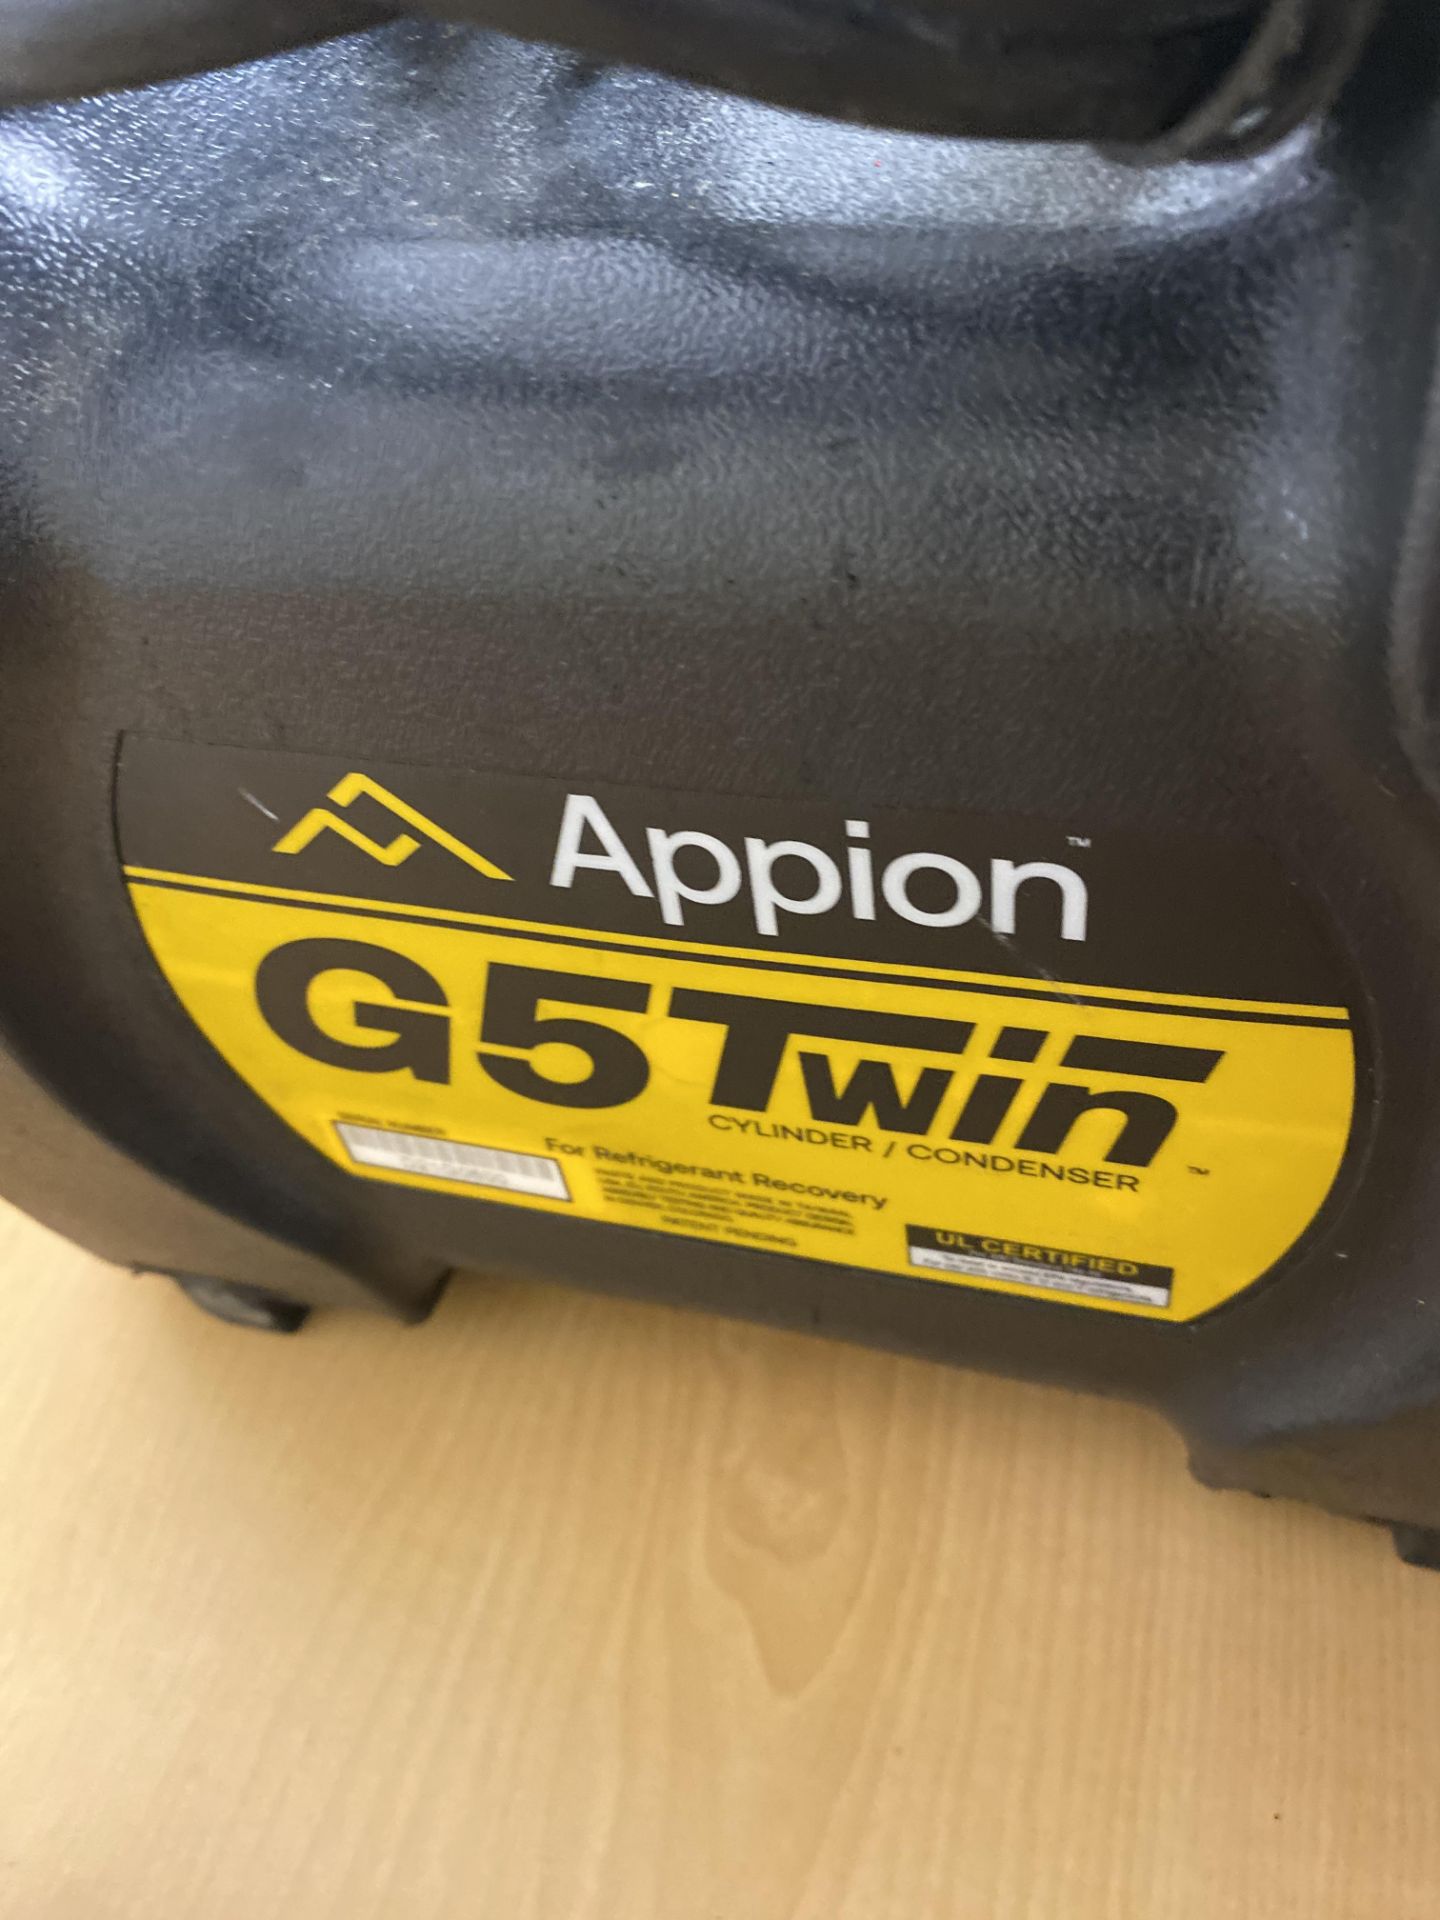 Appion #G5Twin Refrigerant Recovery Unit - Image 3 of 3